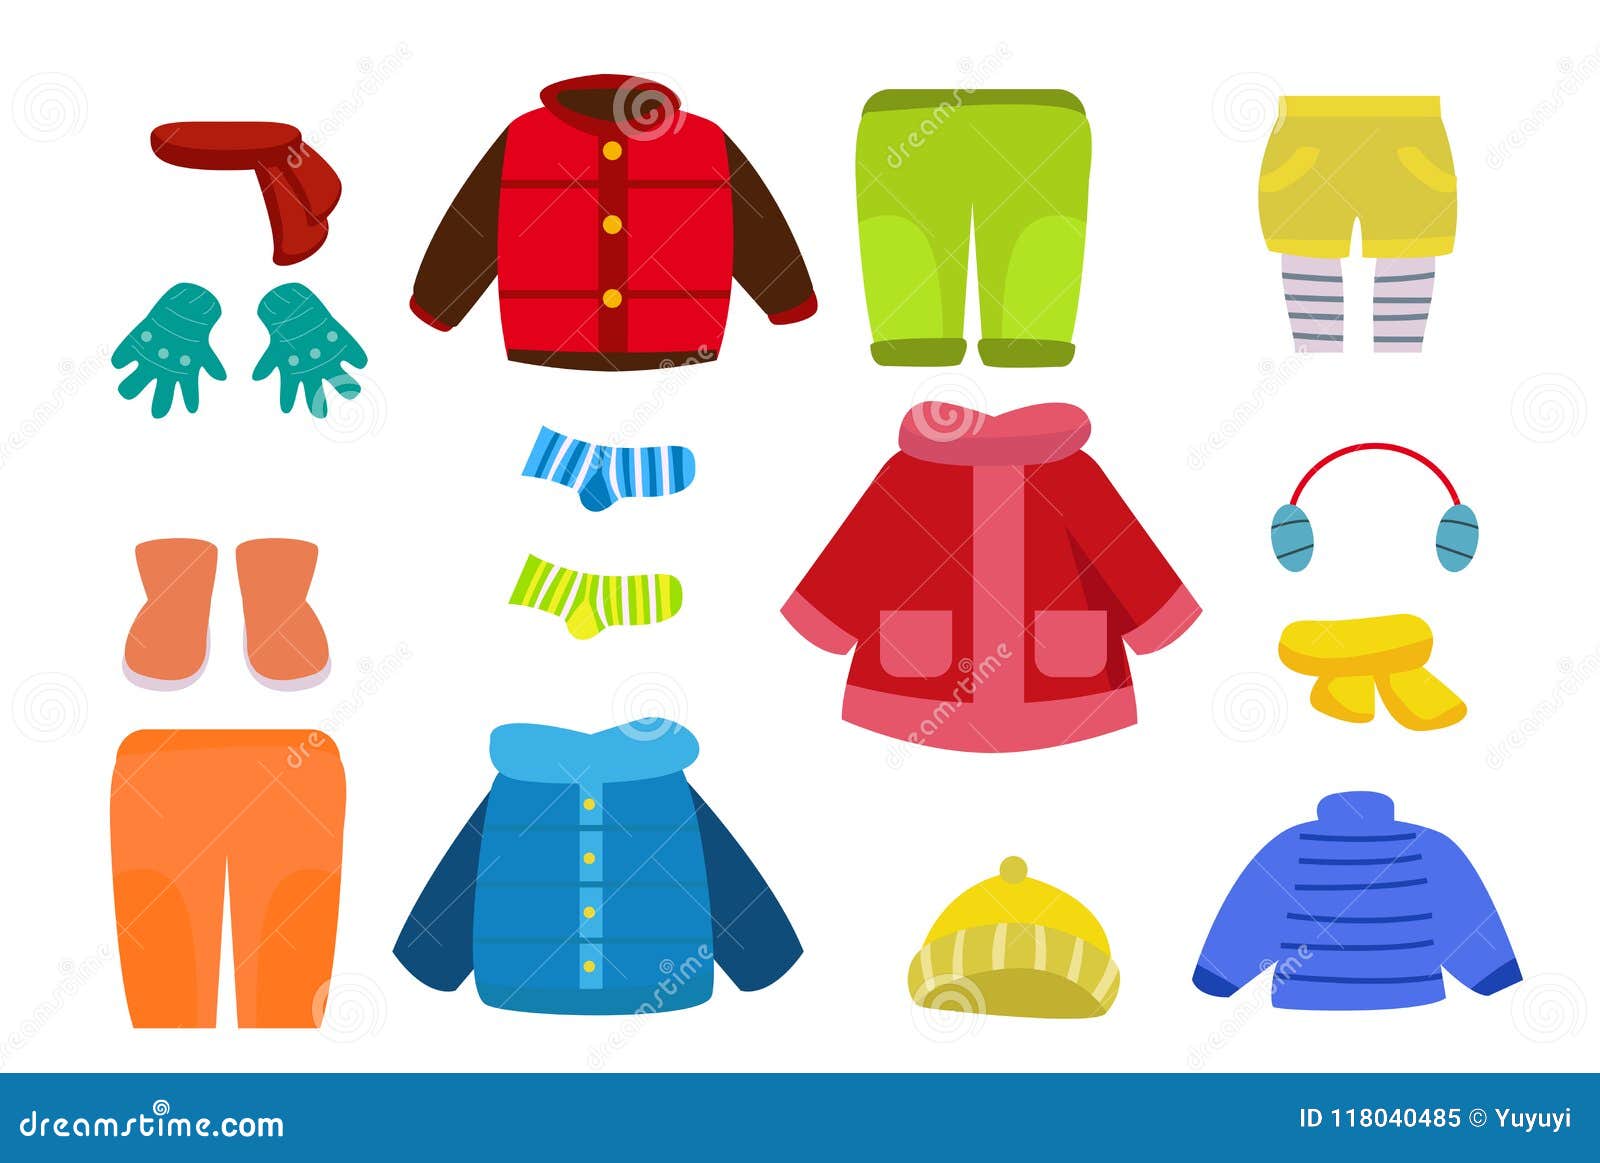 Winter clothes collection stock vector. Illustration of style - 118040485